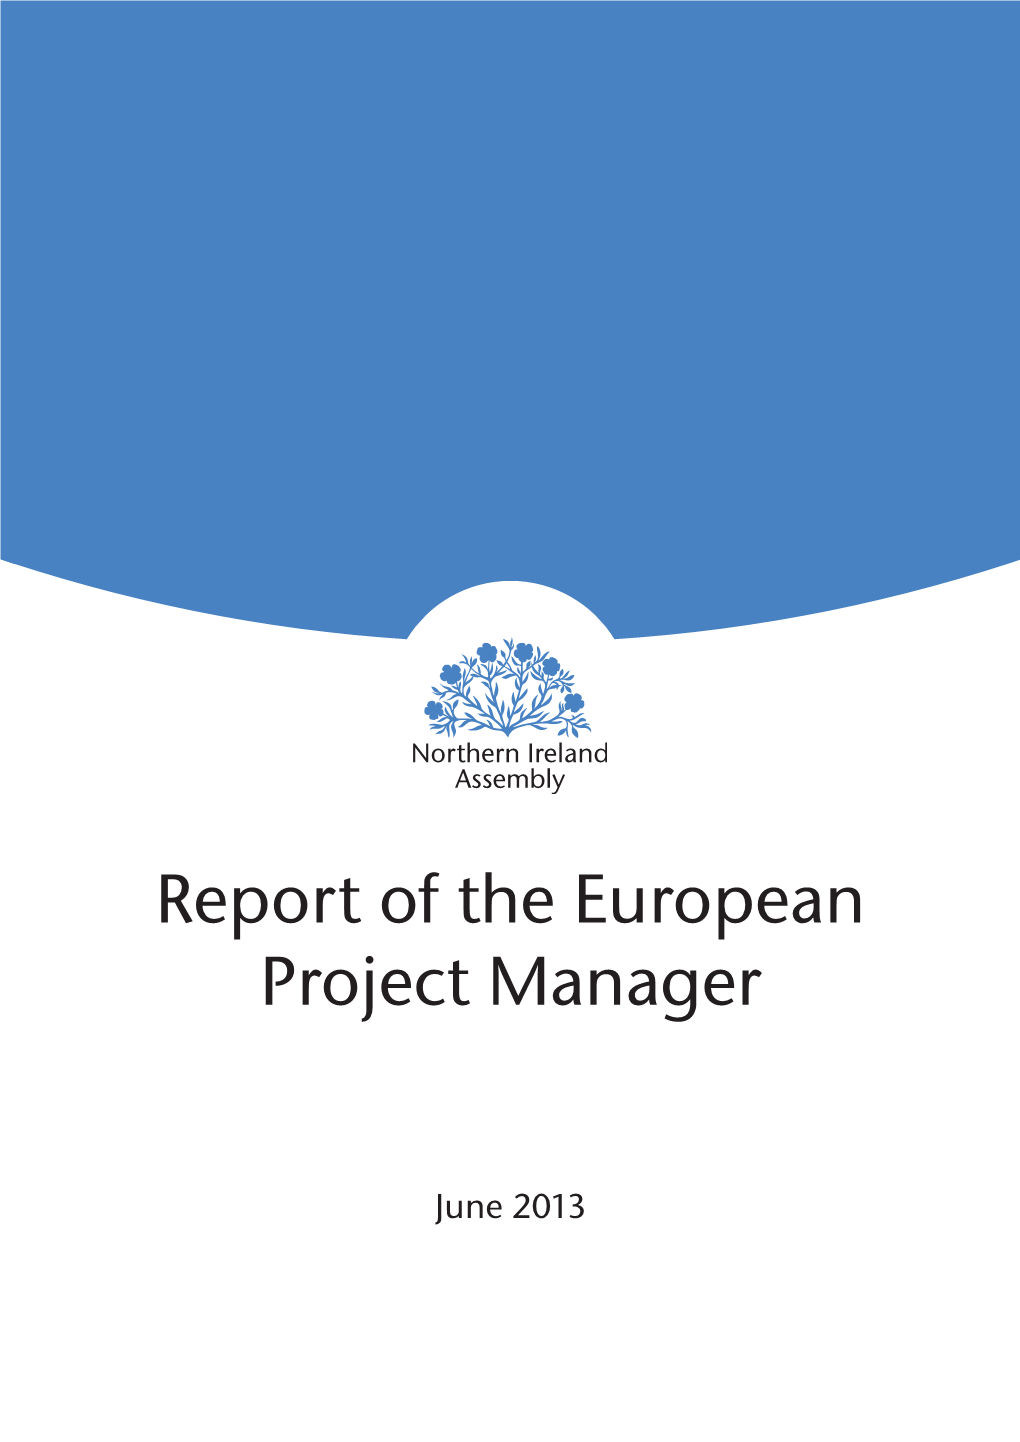 Report of the European Project Manager